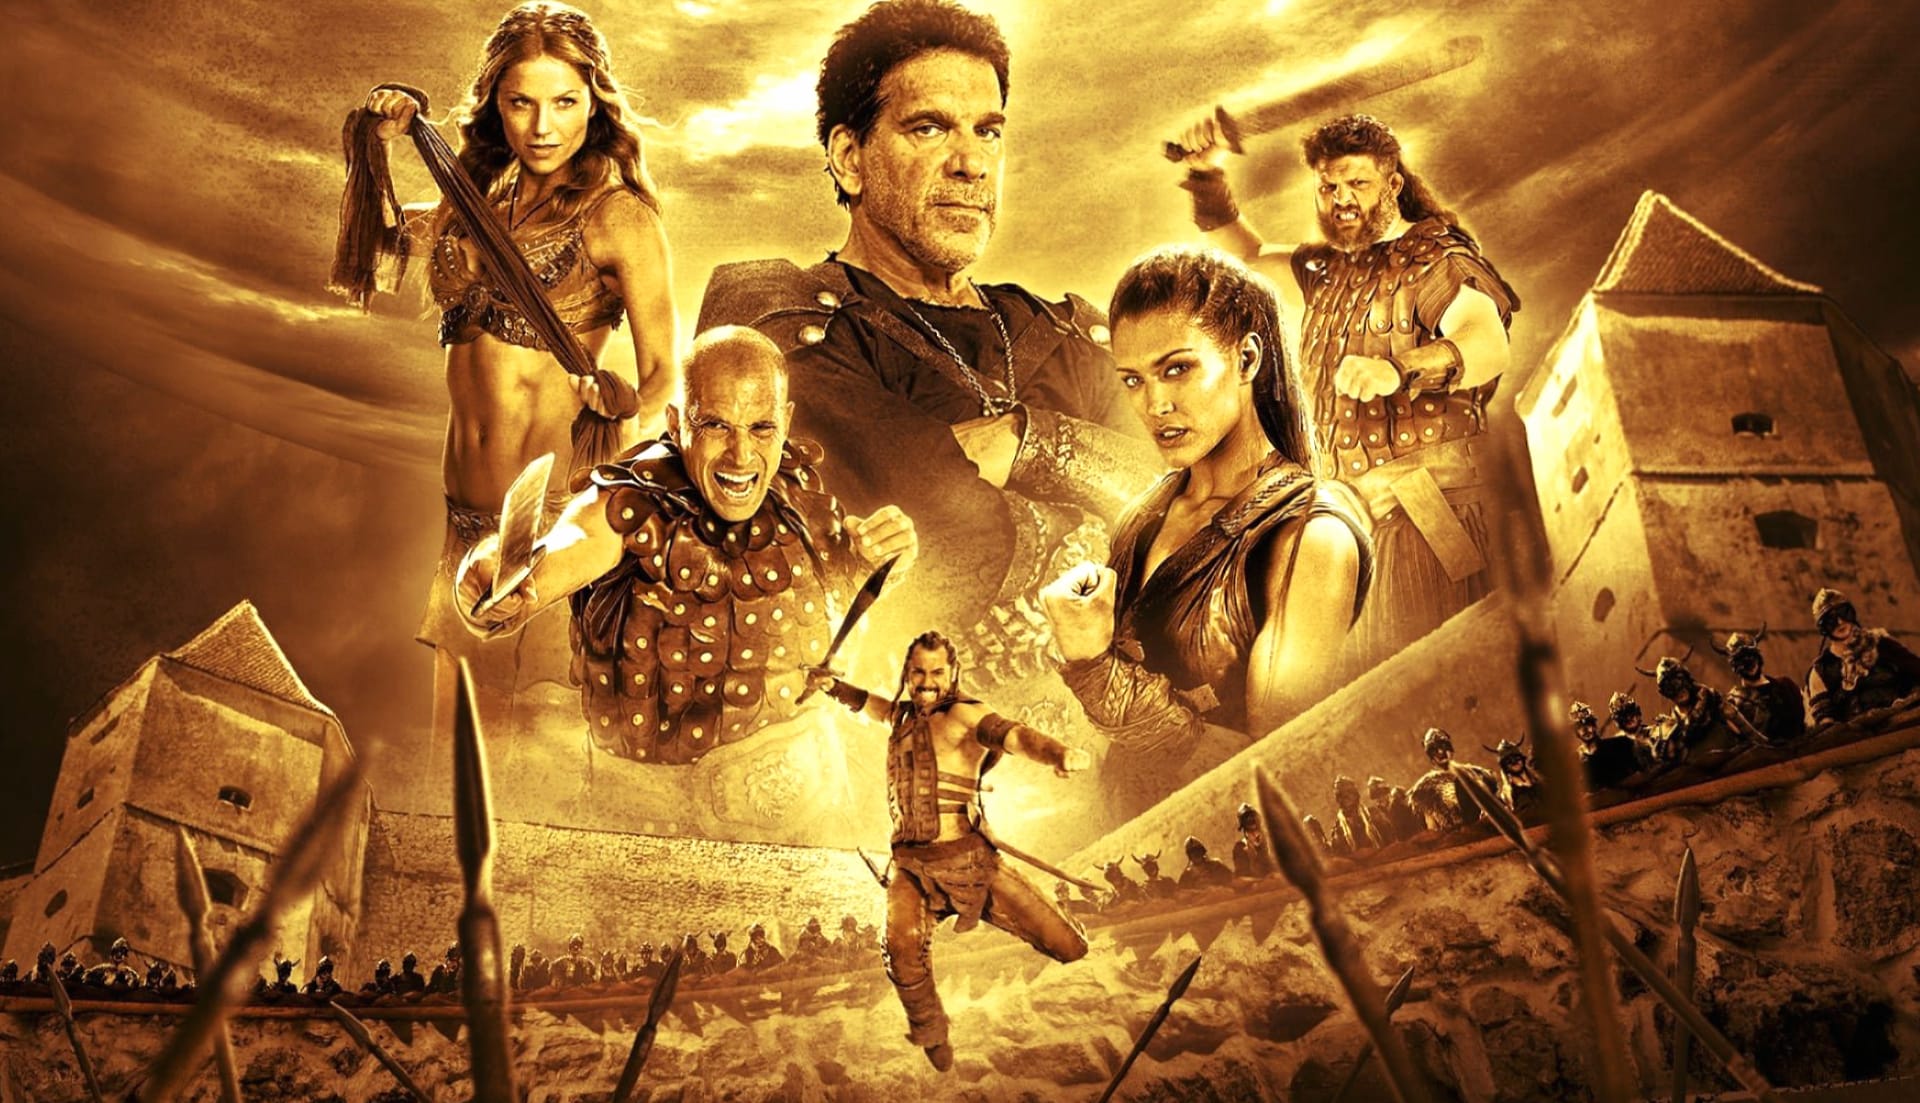 The Scorpion King 4 Quest for Power wallpapers HD quality